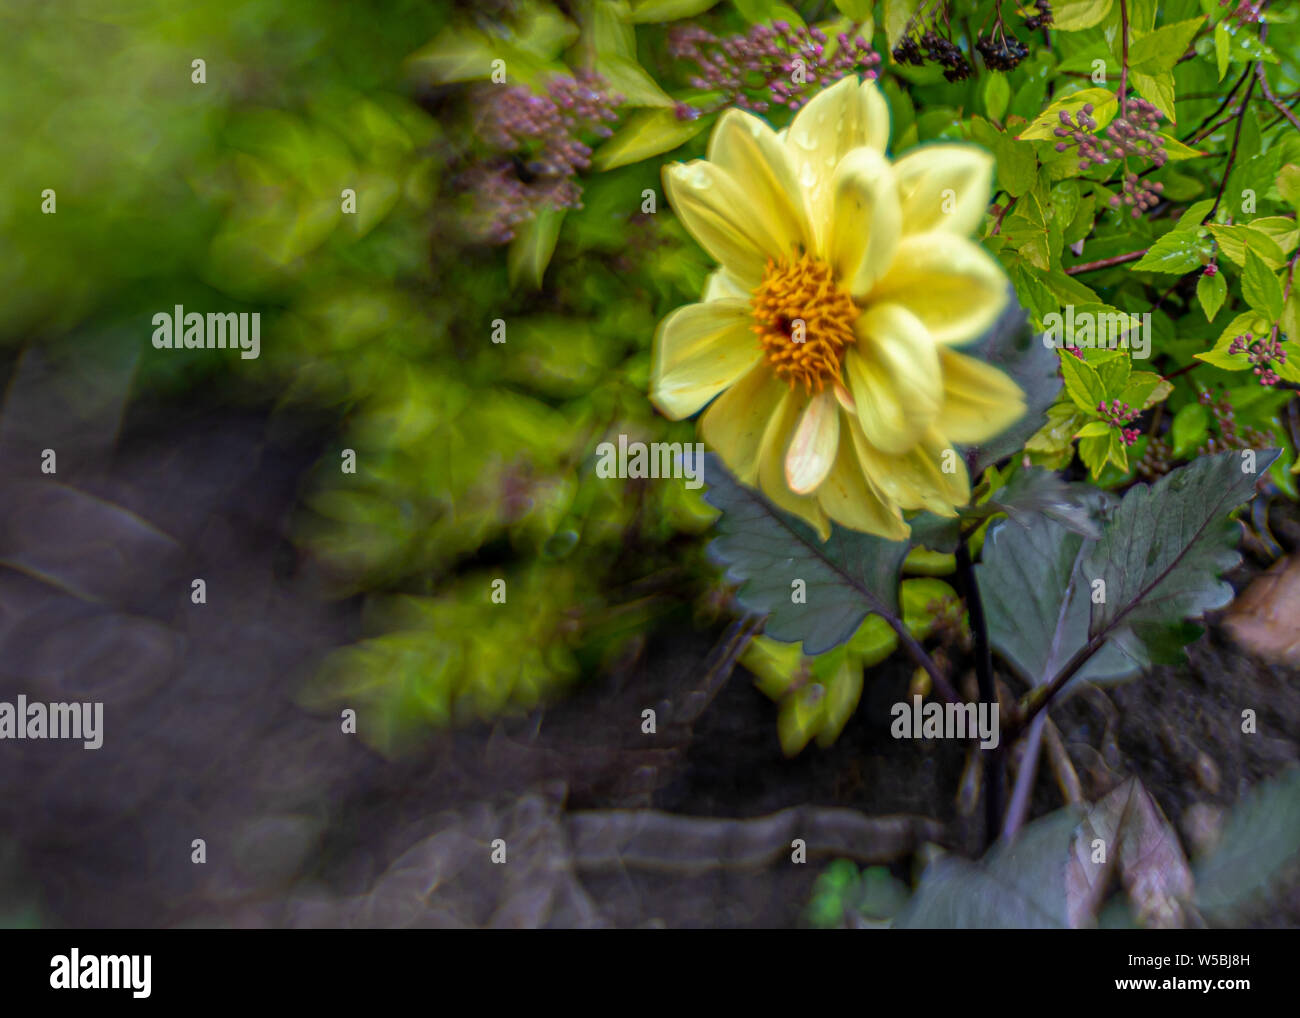 Single yellow Dahlia bloom with dark green foliage in right half of image with blurred garden foliage to left half. Stock Photo